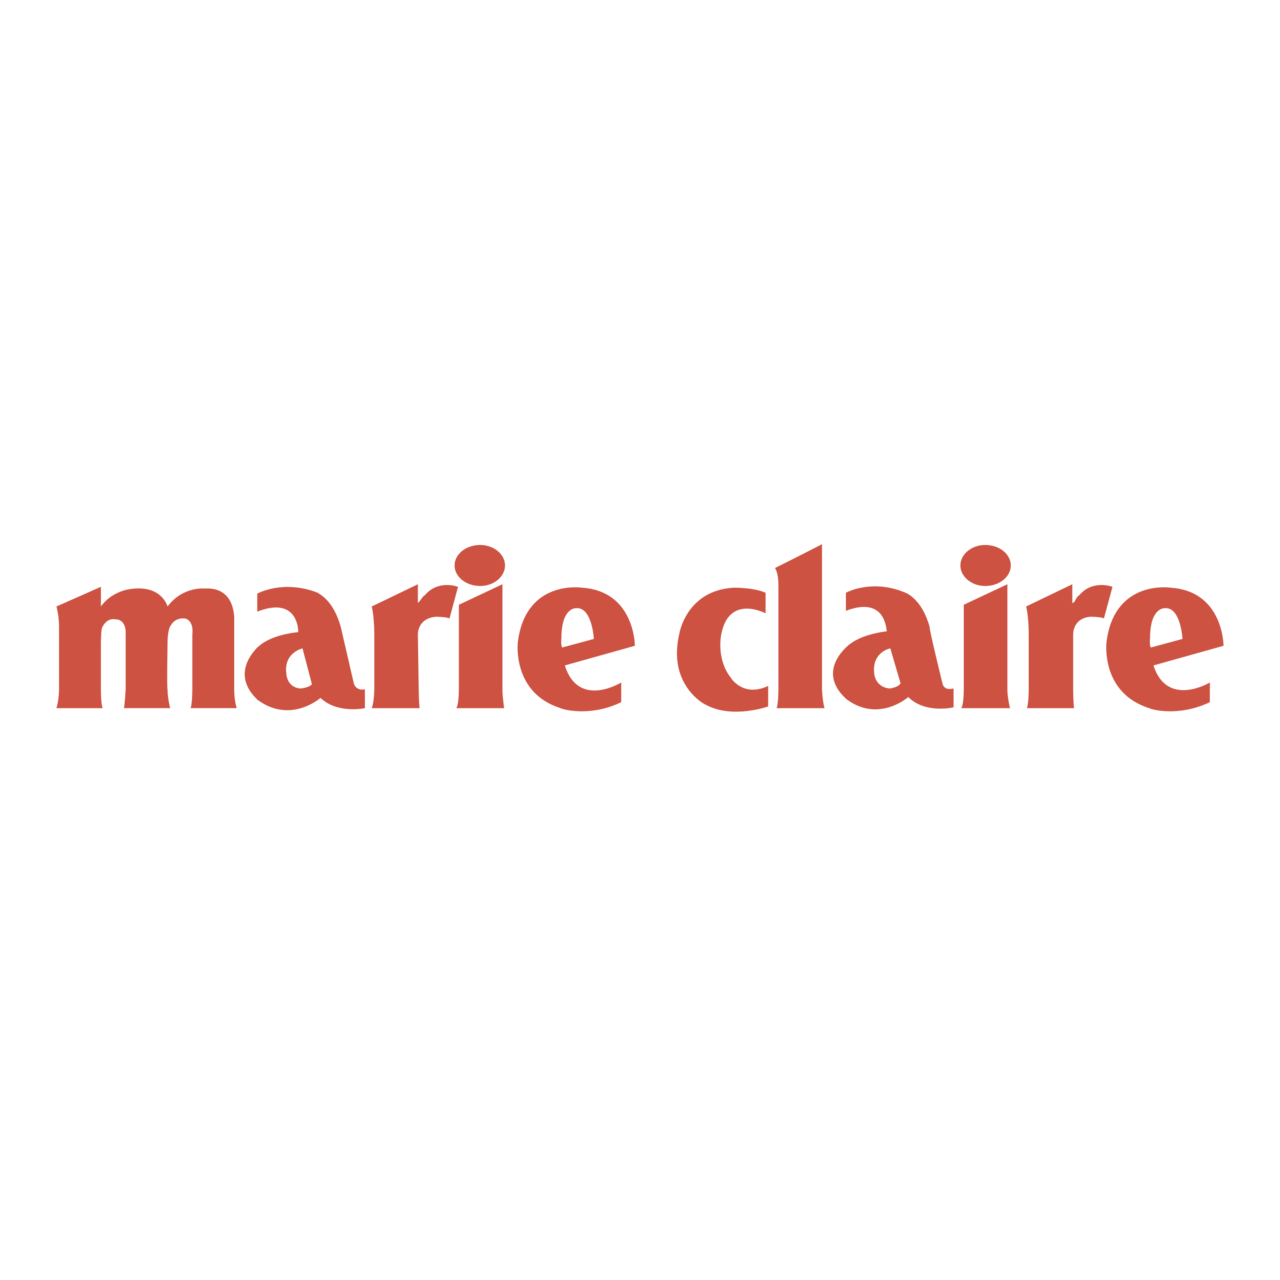 marie-claire-logo.png